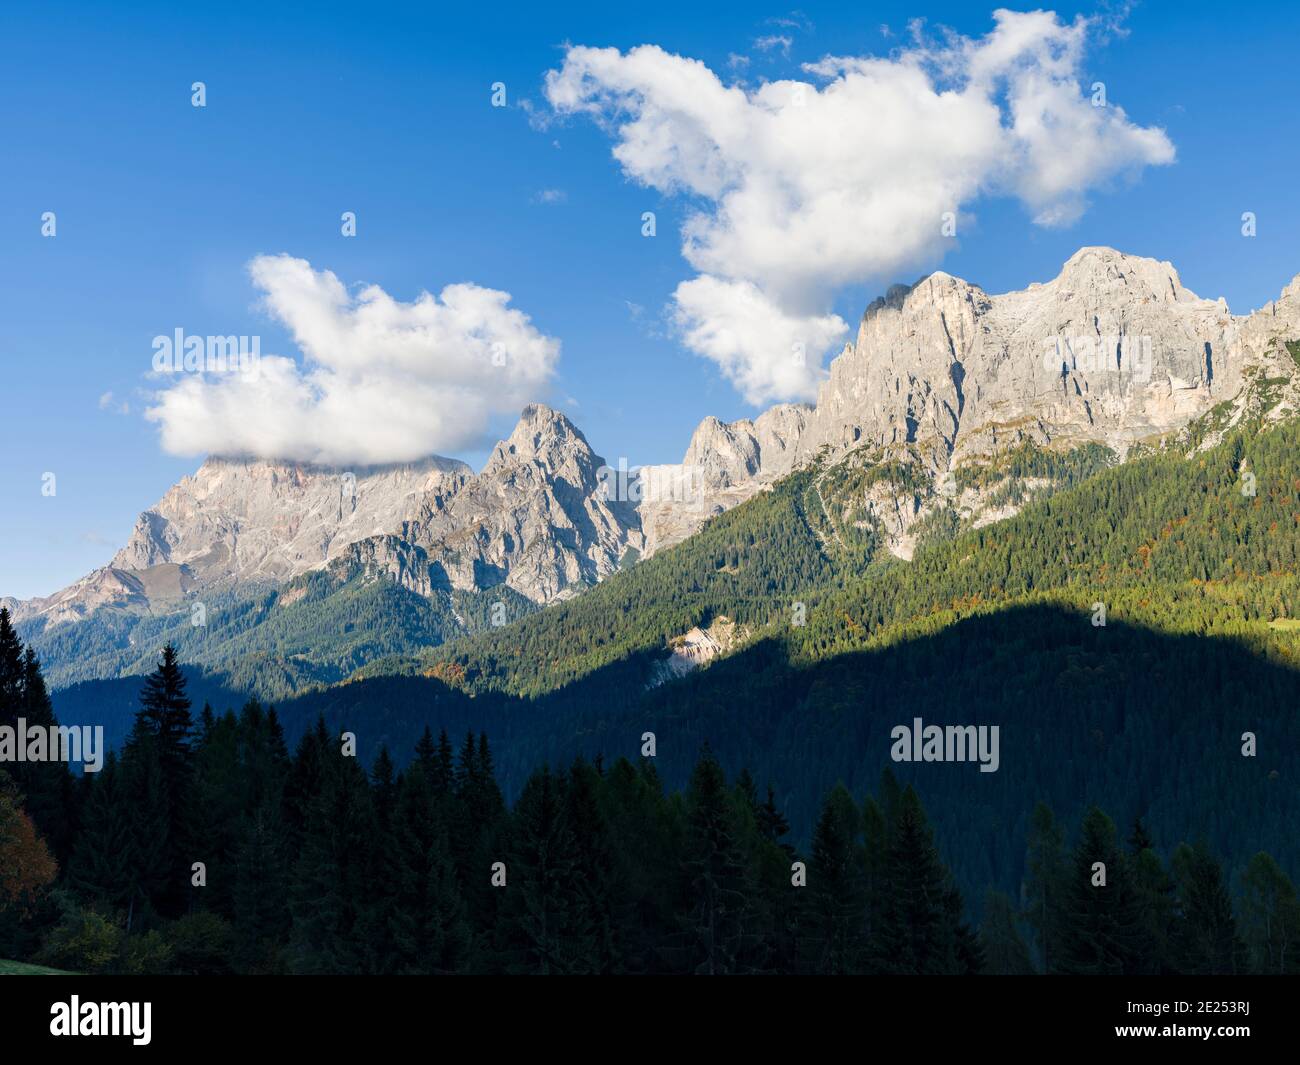 Val Cismon and the  Pale di San Martino, part of UNESCO world heritage Dolomites, in the dolomites of the Primiero.  Europe, Central Europe, Italy Stock Photo